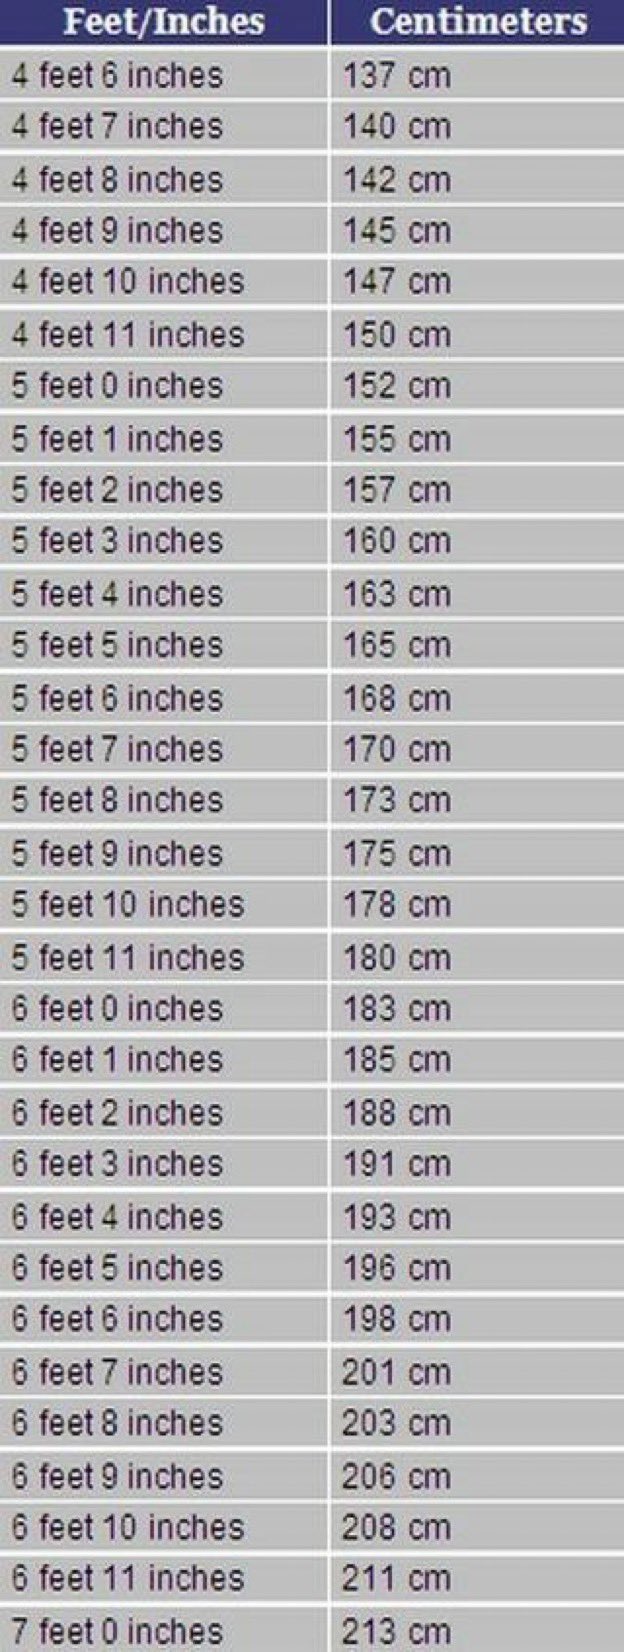 5 Feet 5 inches in cm. Ft inch to cm. 6 Foot 7 inches in cm. 5'6 In cm height.